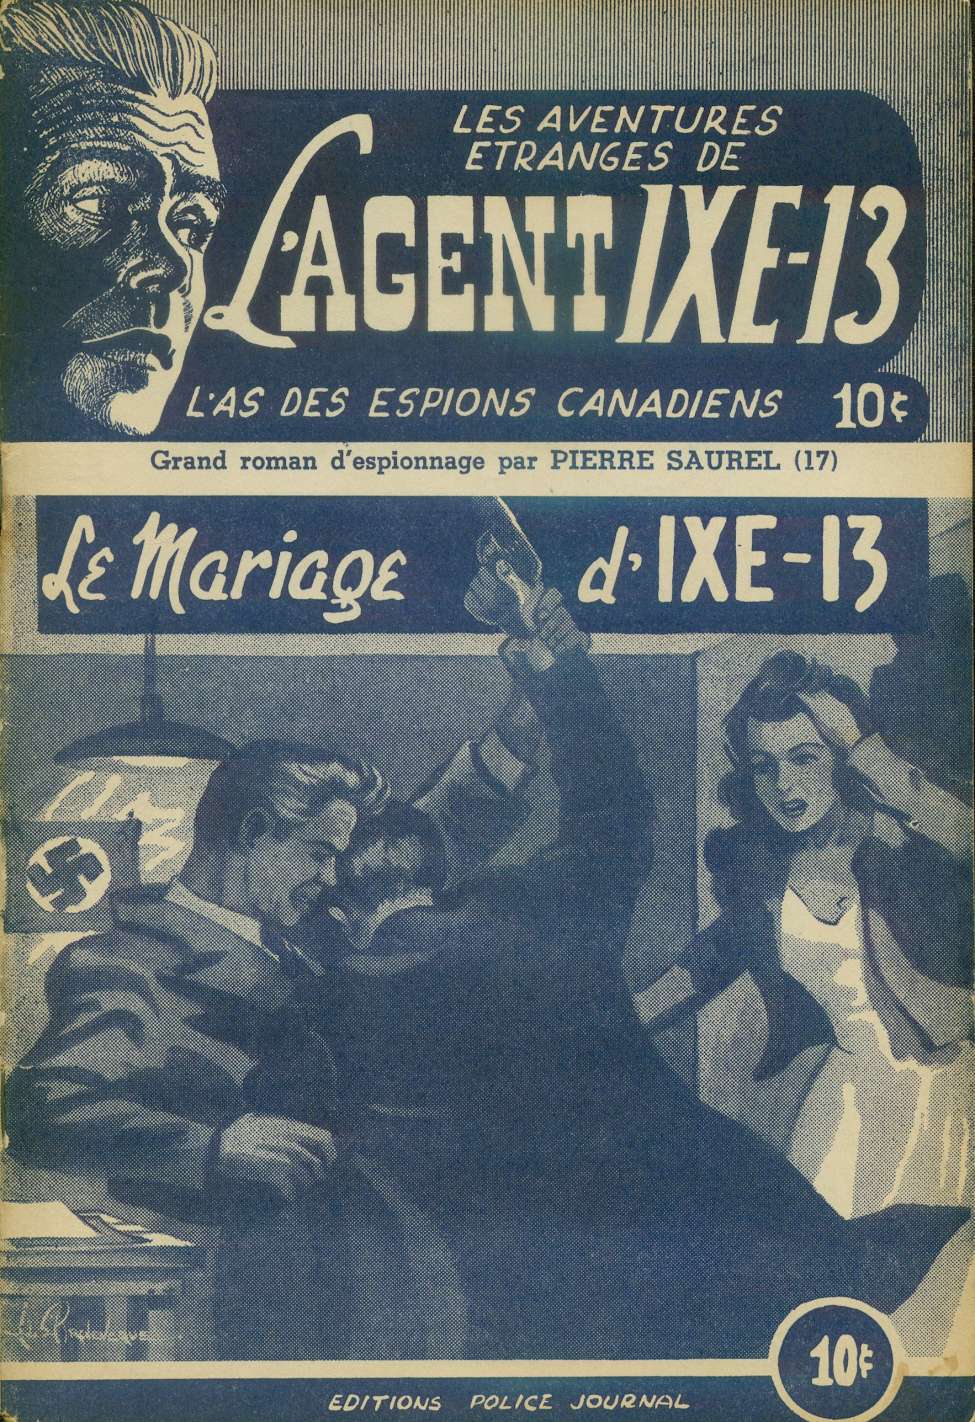 Comic Book Cover For L'Agent IXE-13 v2 17 - Le mariage d'IXE-13